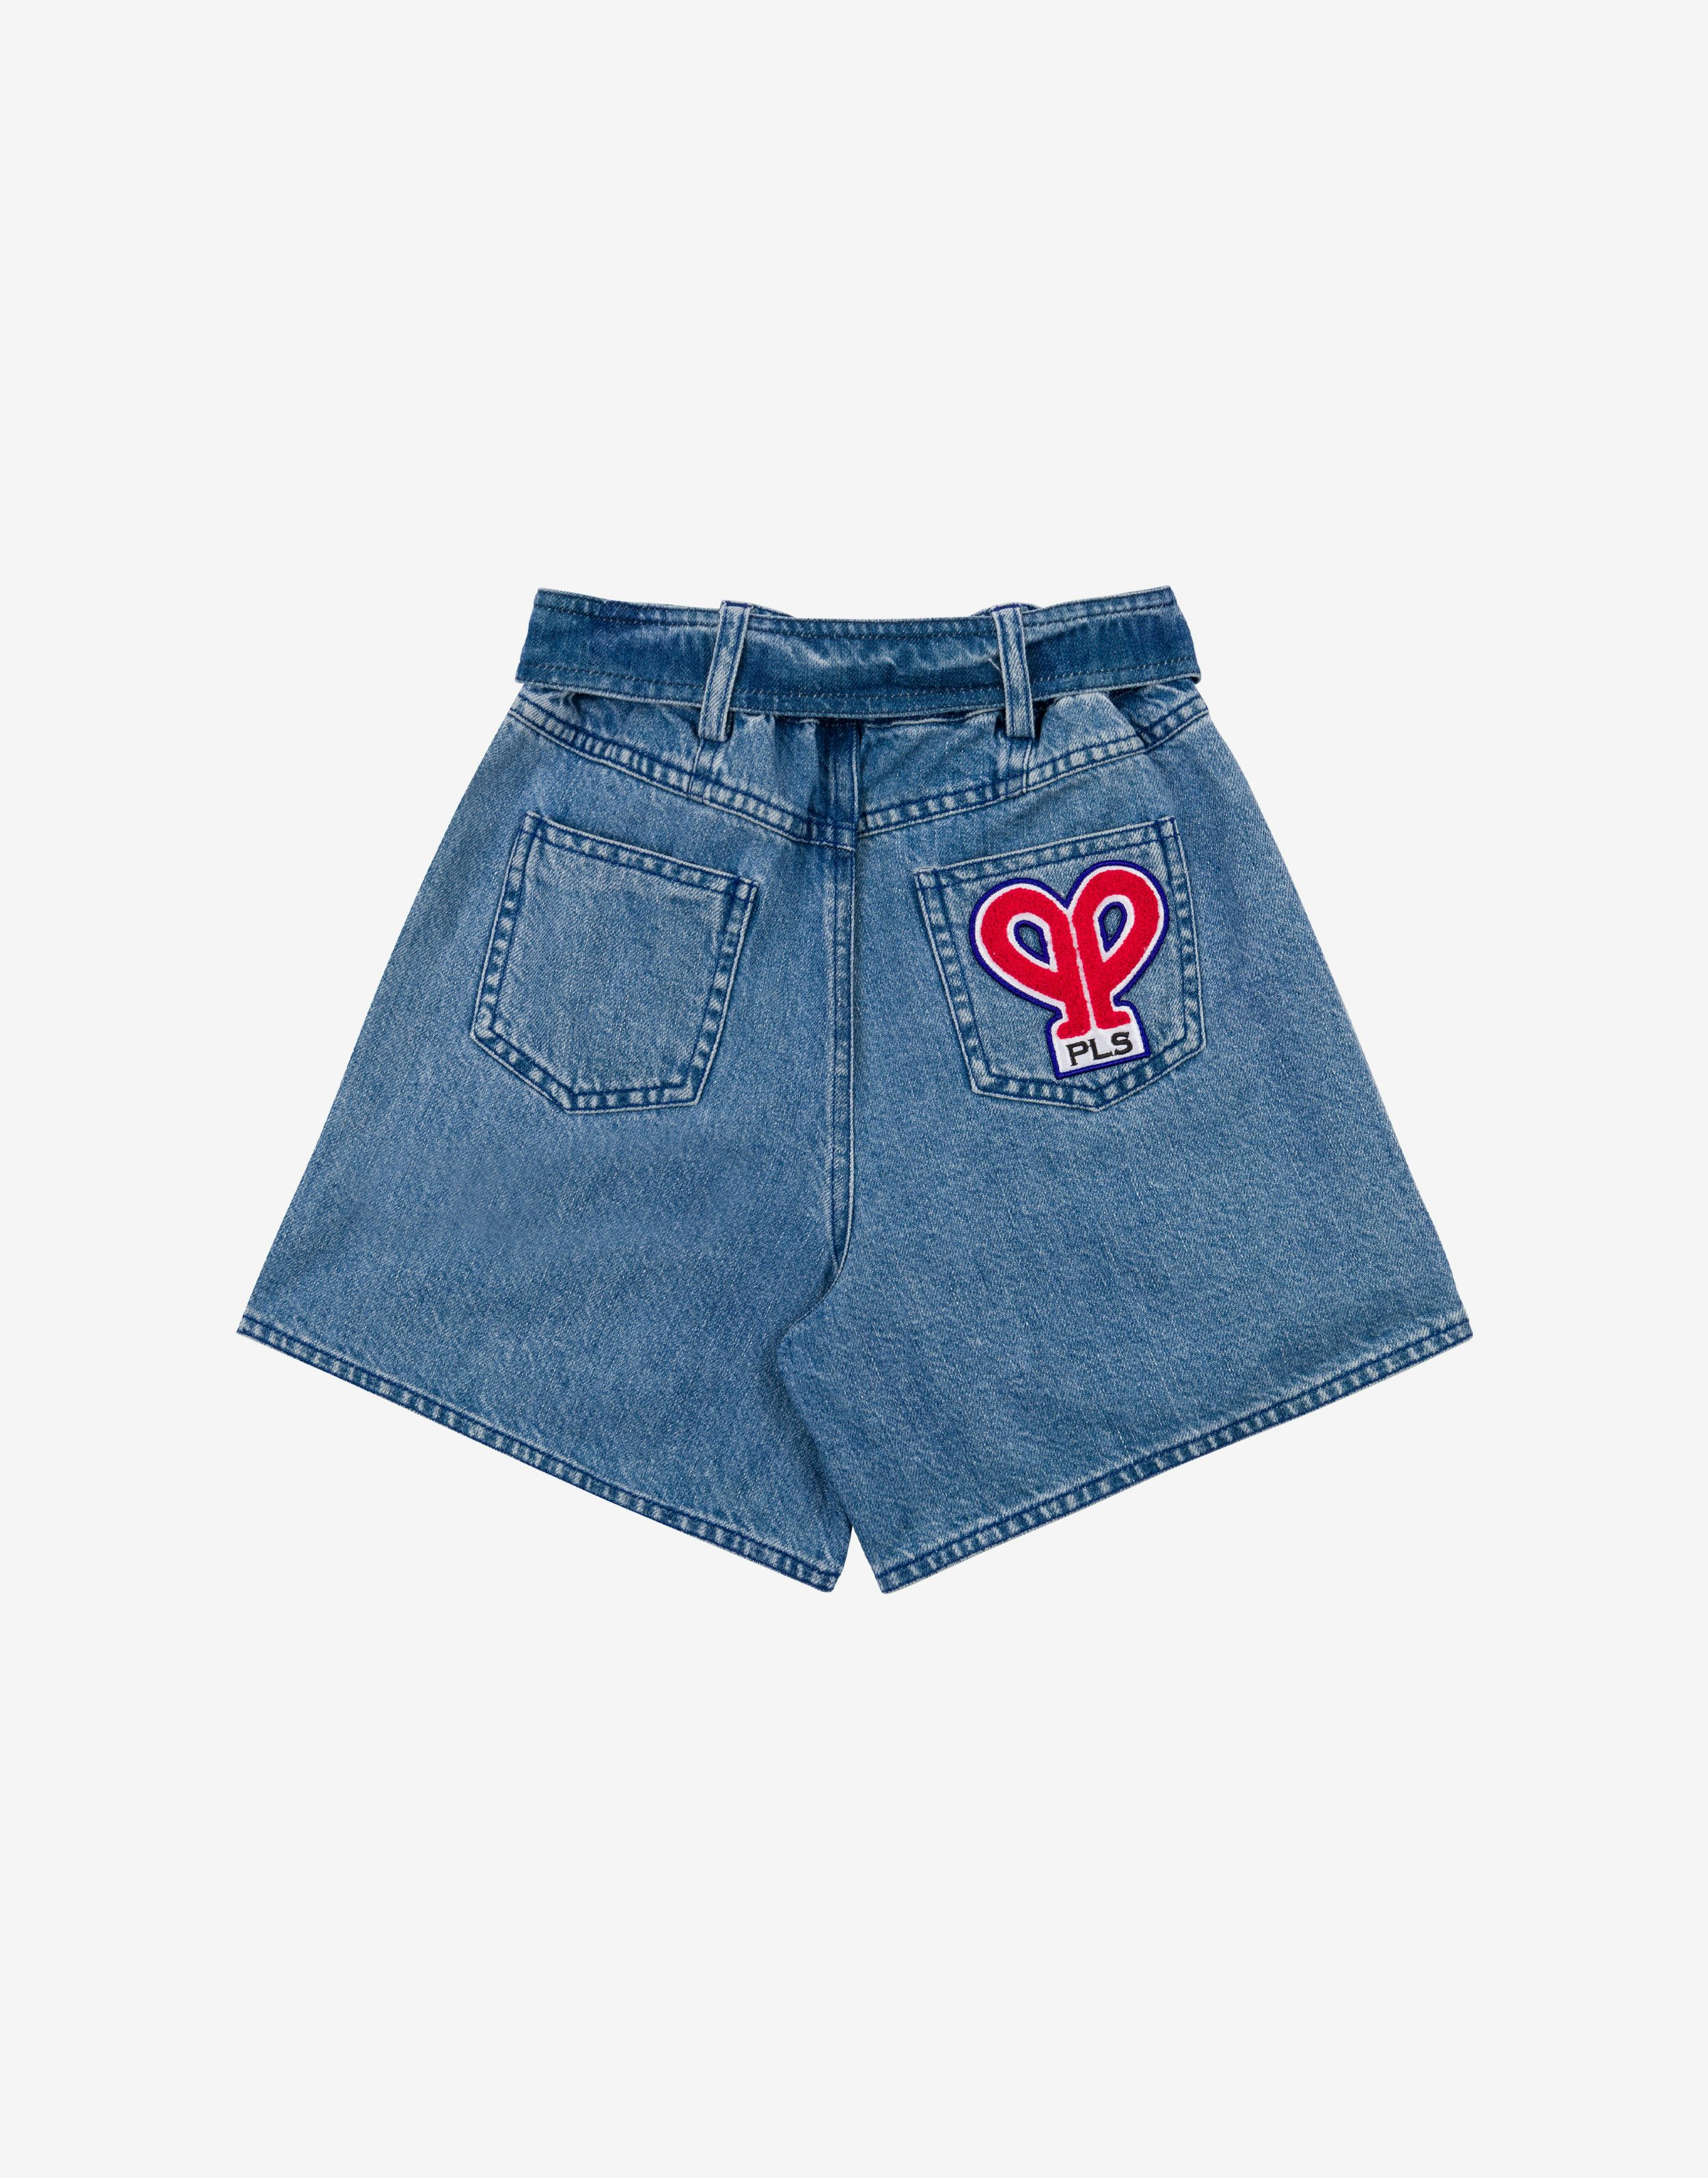 Kids' denim shorts with 'double P' patch